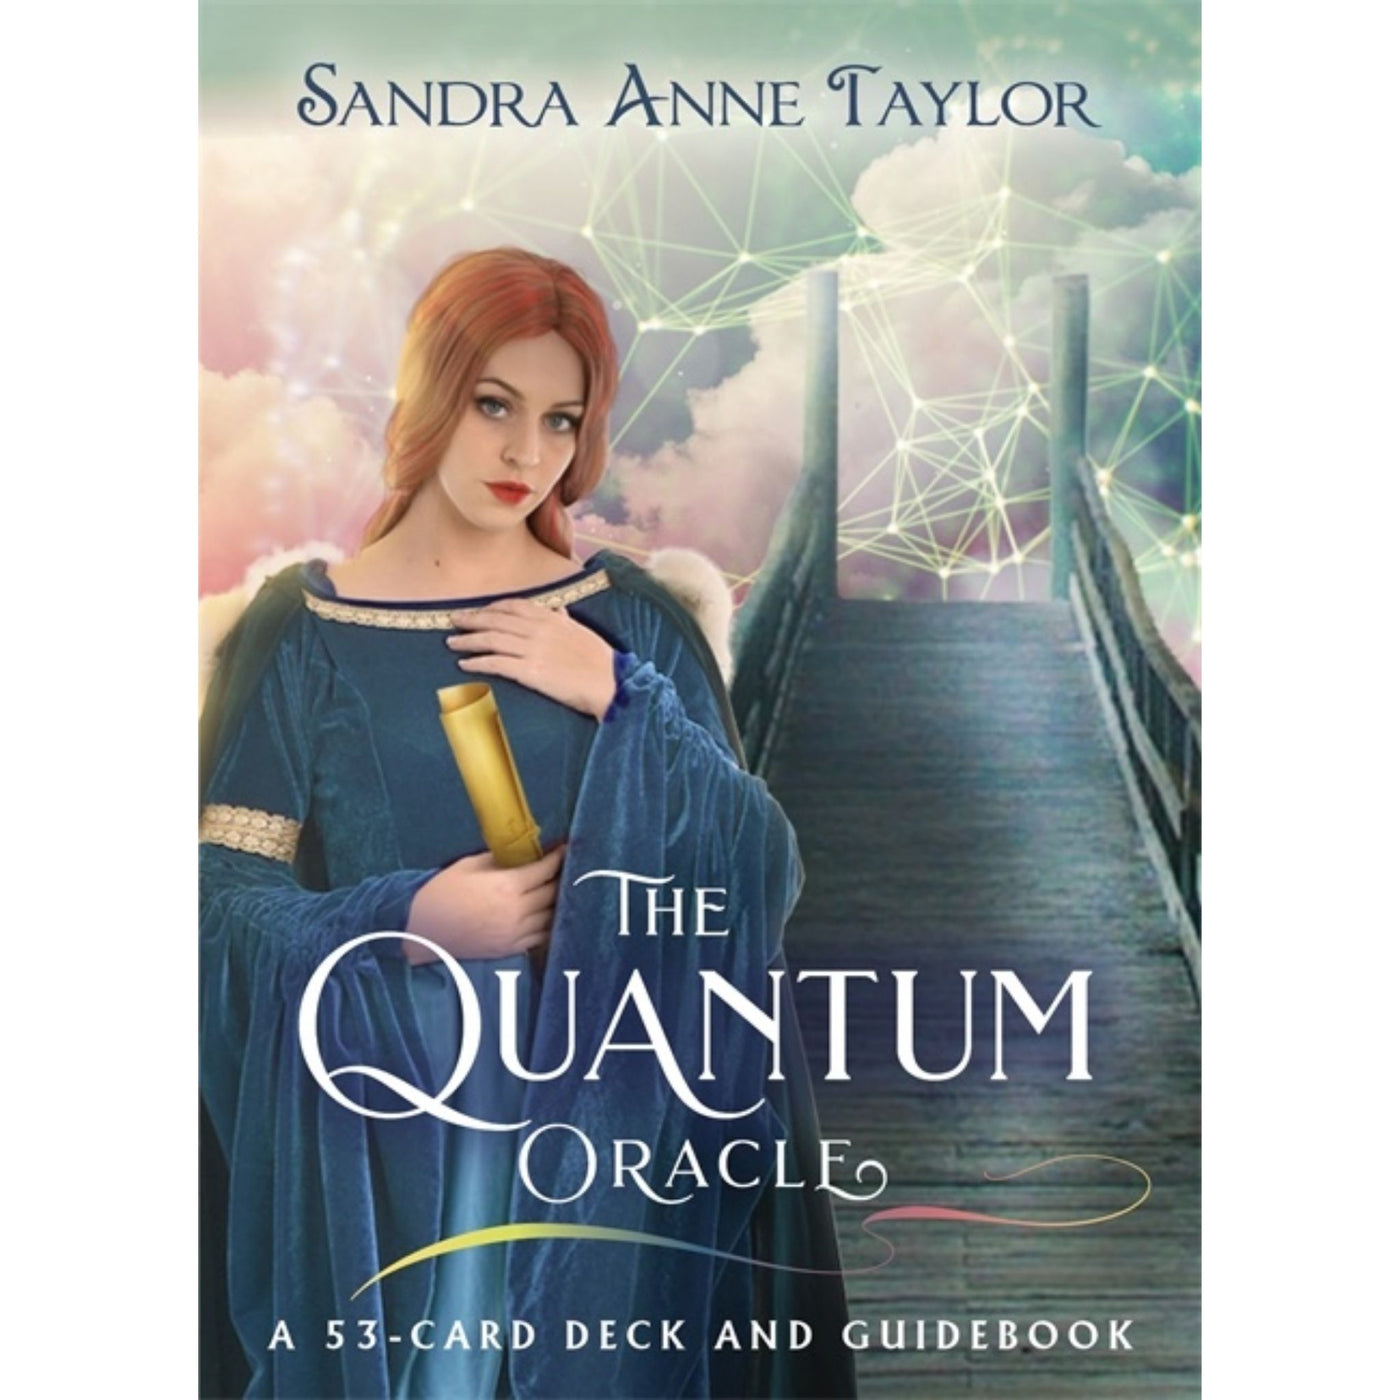 The Quantum oracle - Sandra Anne Taylor